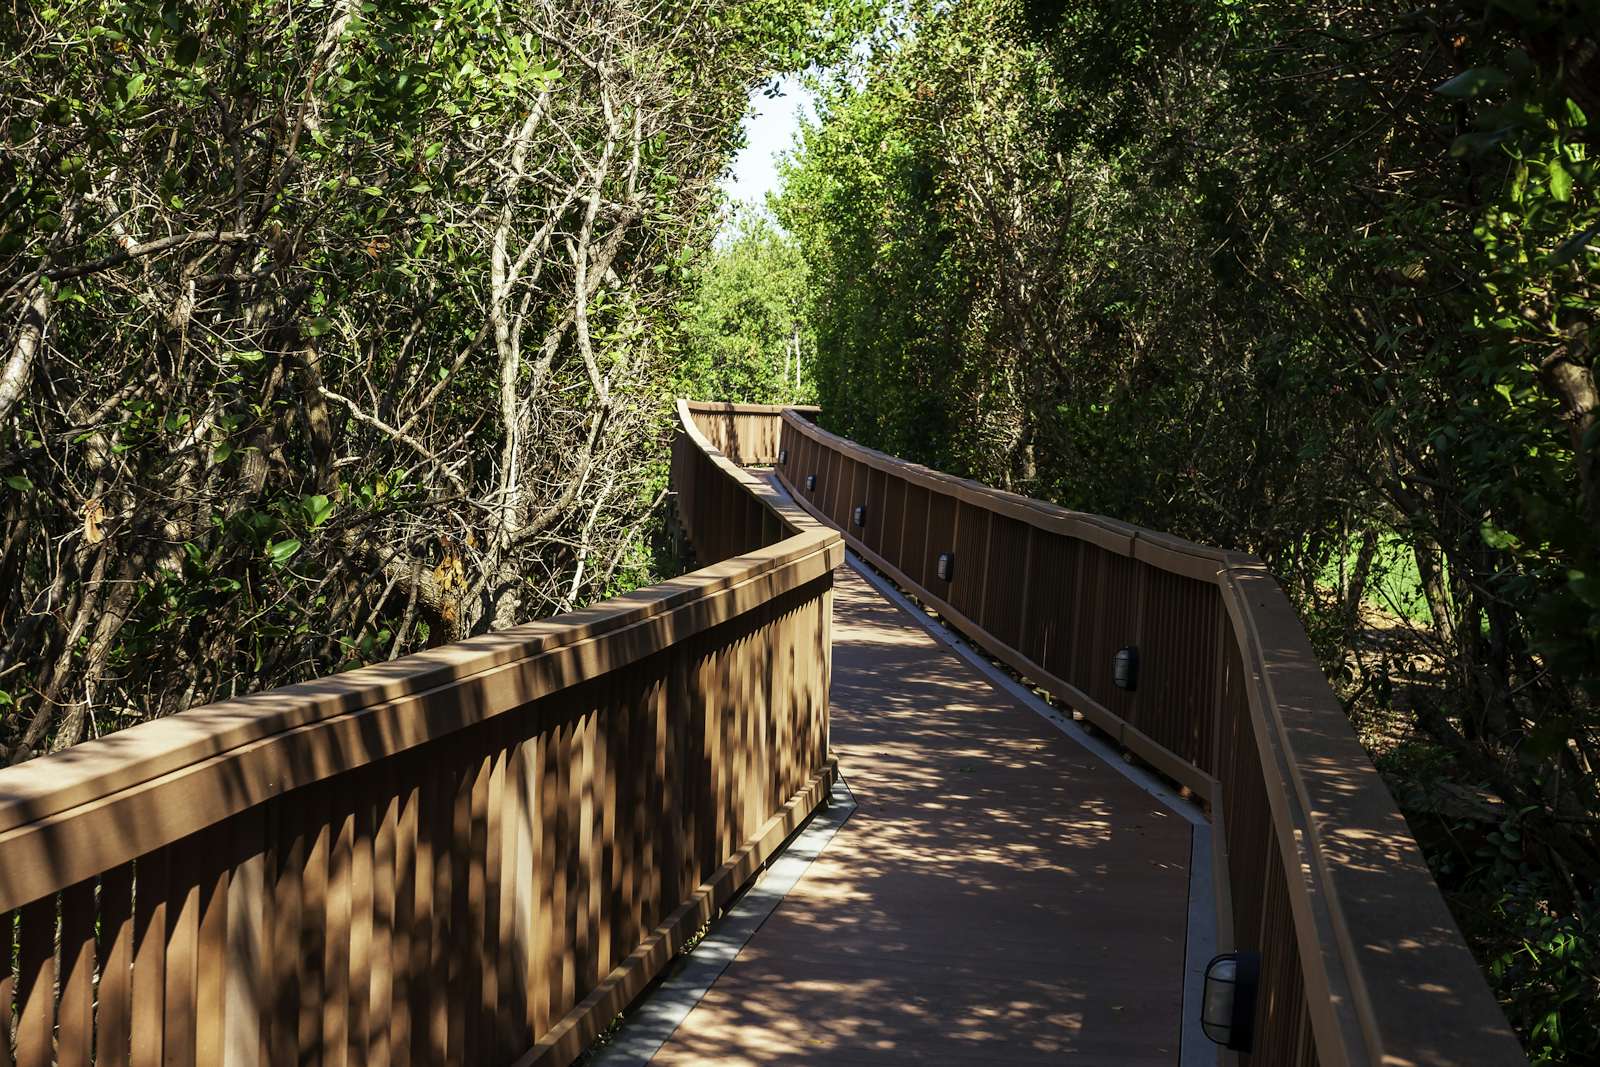 Elevated and lighted boardwalk meandering through a Mangrove swamp near Tampa, Florida